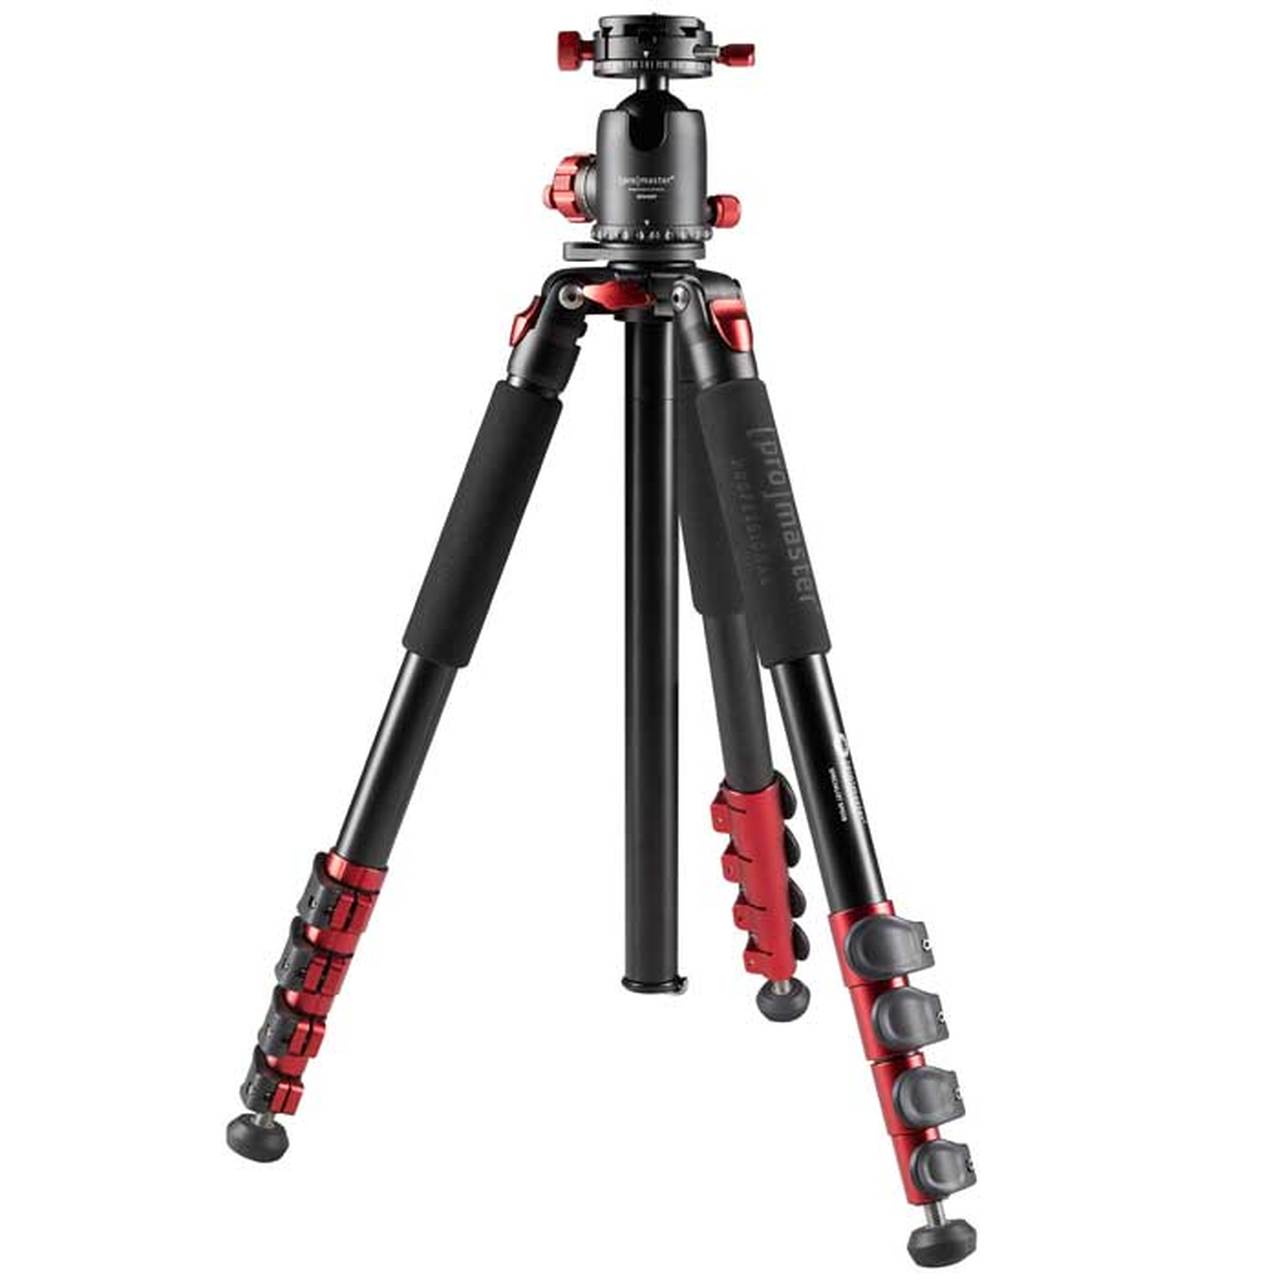 Promaster 8125 SP528 Professional Tripod Kit with Head - Specialist Series